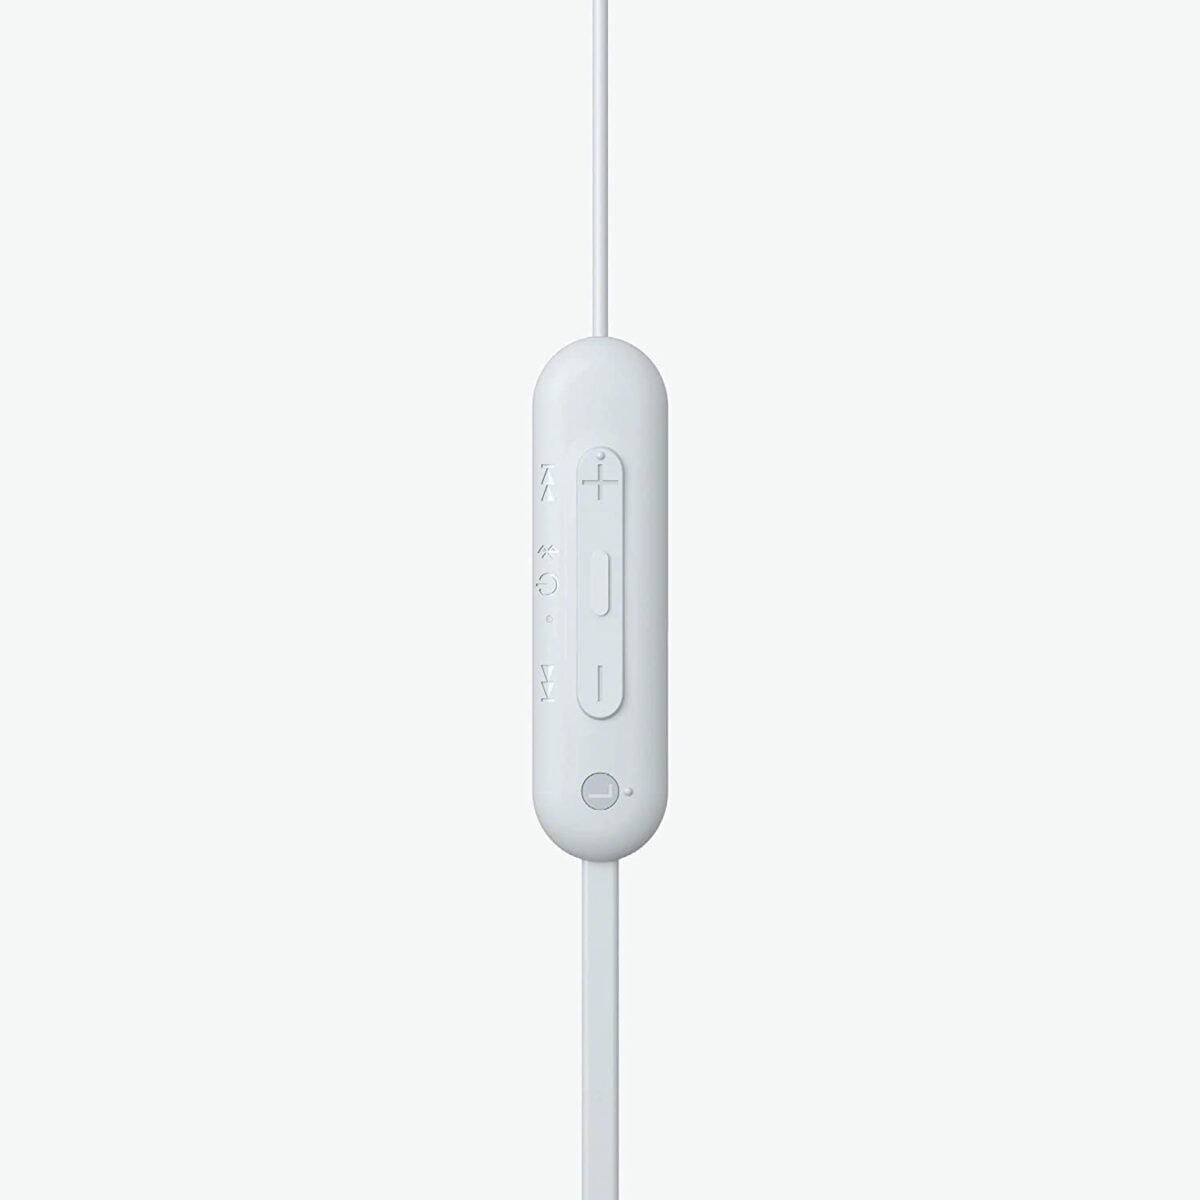 Sony WI C100 Wireless Headphones White 2 Shop Mobile Accessories Online in India